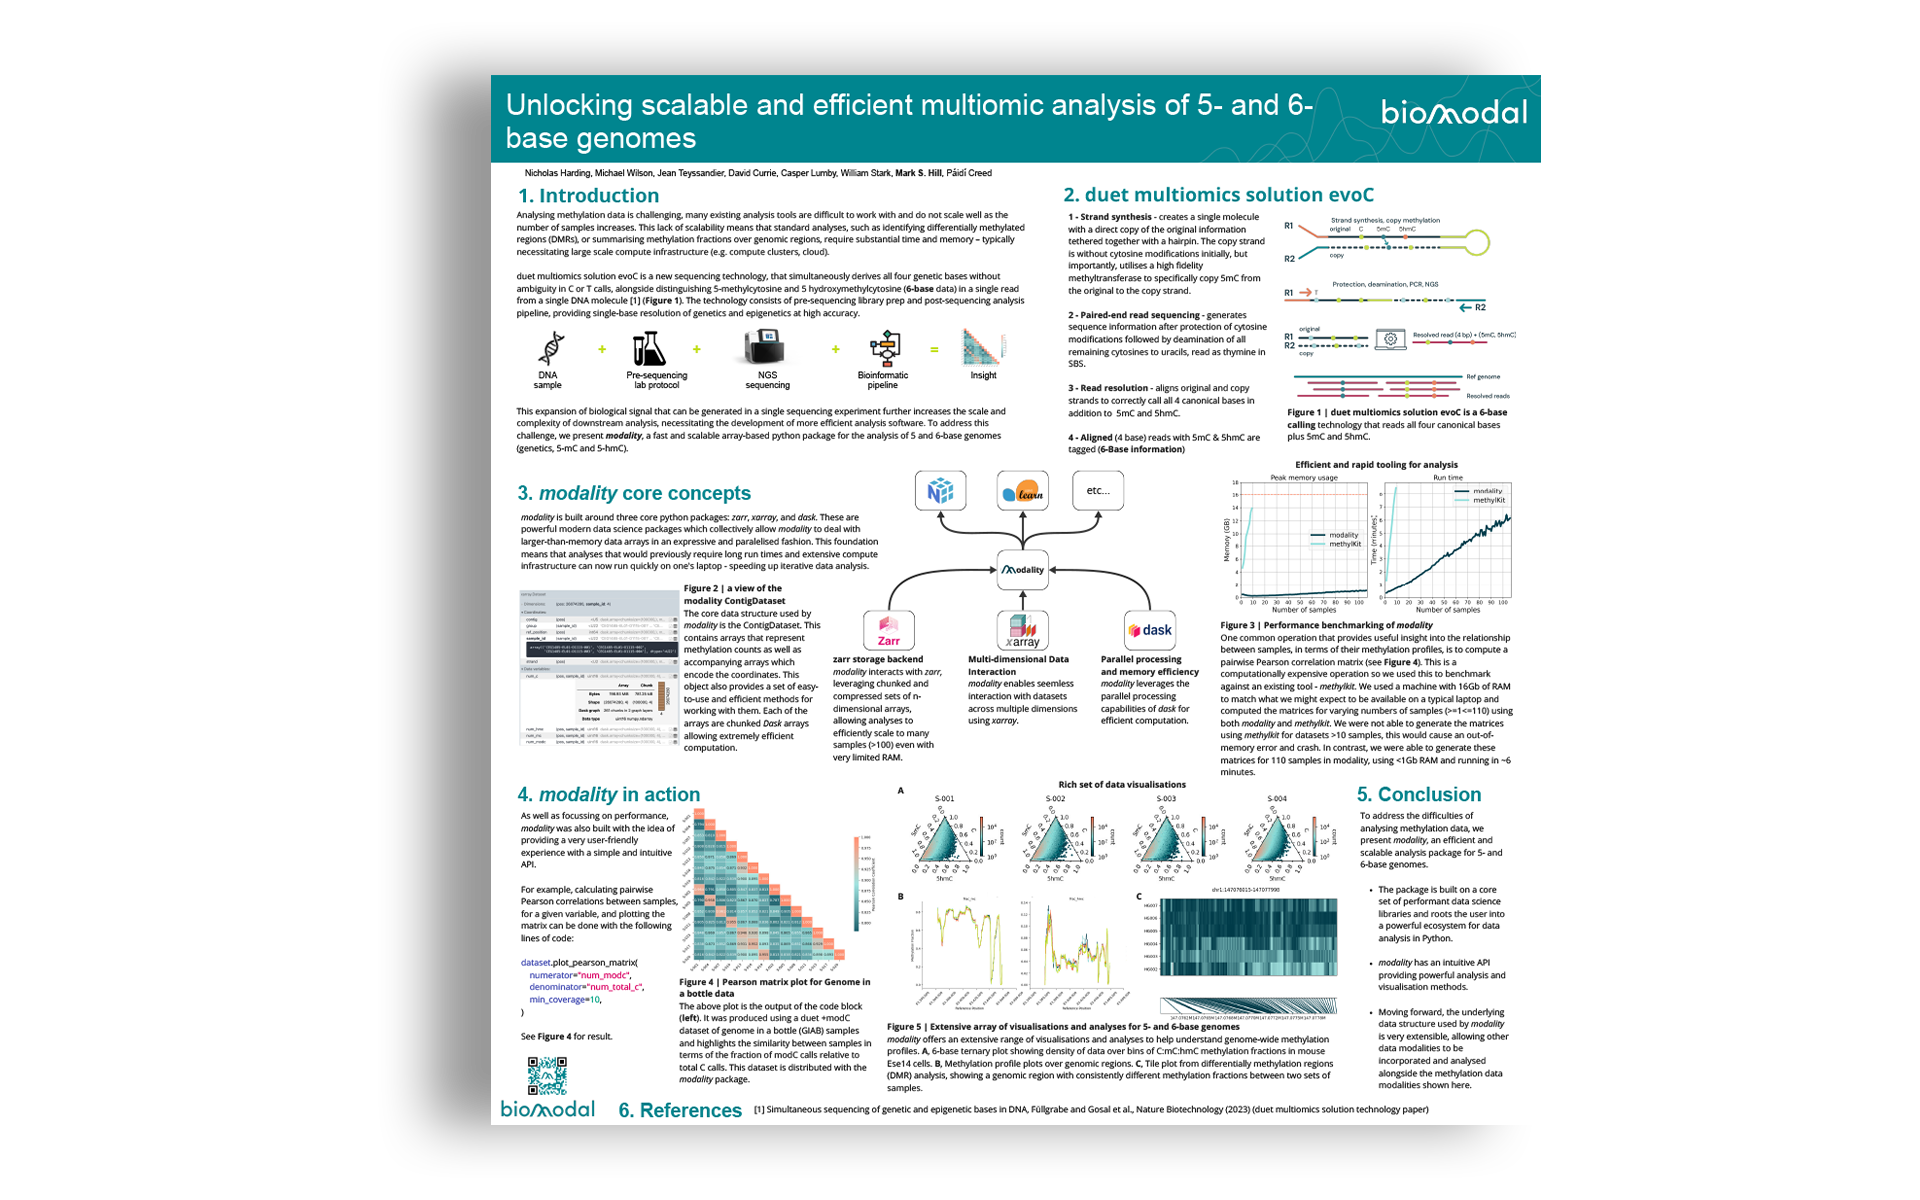 Unlocking scalable and efficient multiomic analysis of 5- and 6-base genomes